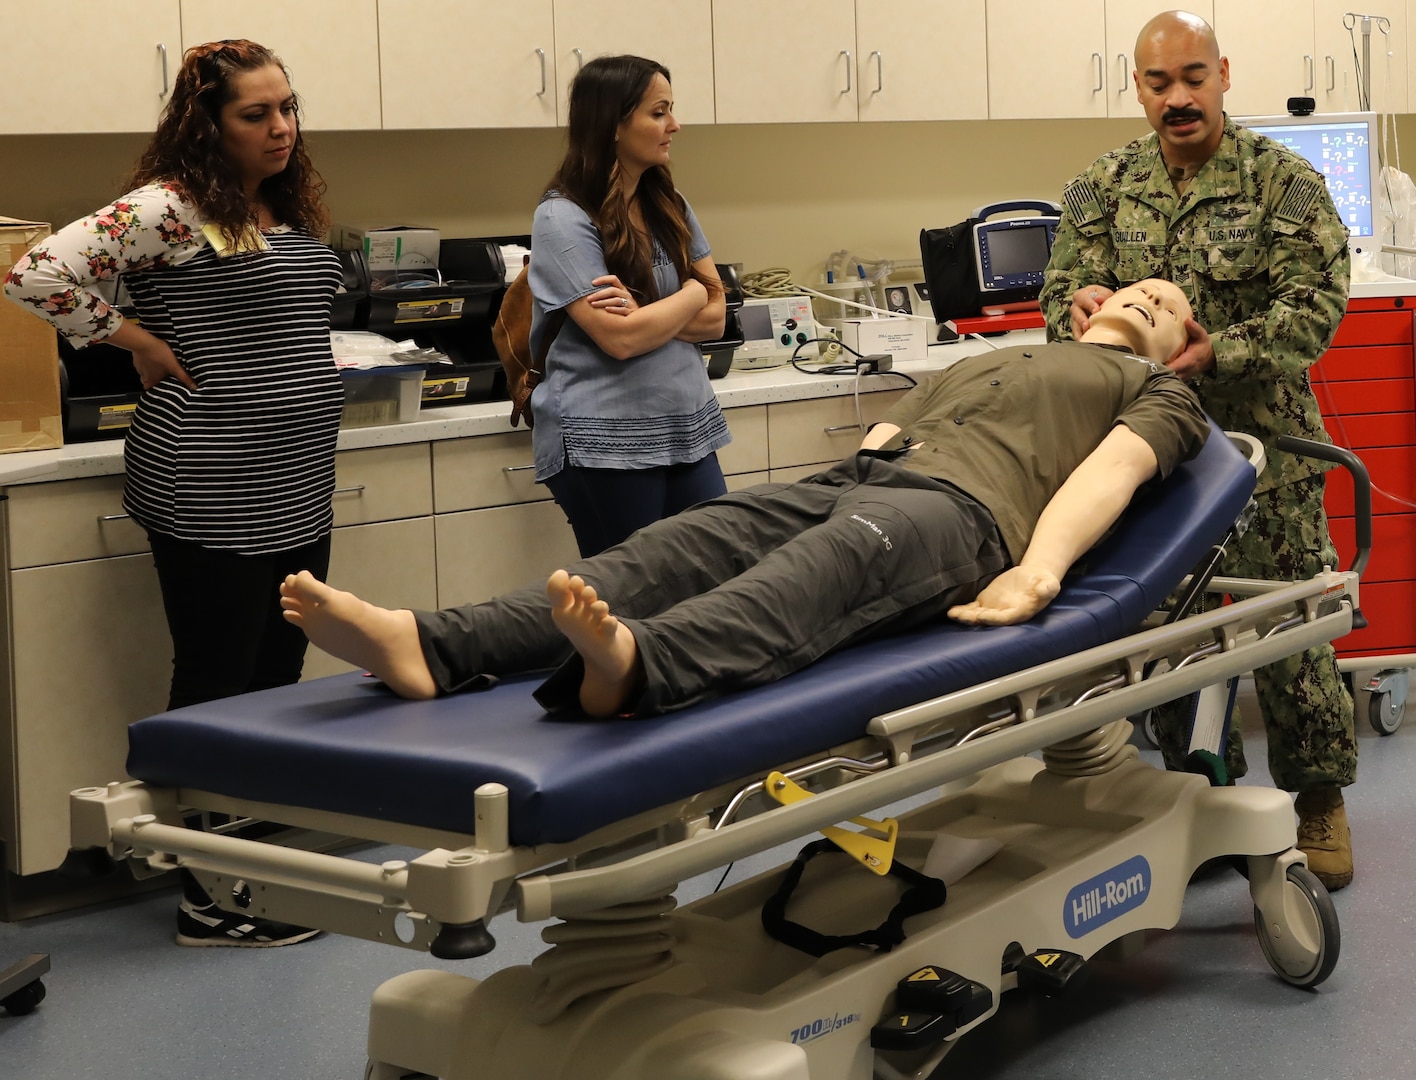 The Salt Lake City U.S. Army Recruiting Battalion brought 10 educators from their area of responsibility to Joint Base San Antonio-Fort Sam Houston March 6-7 to learn about the educational opportunities the Army provides to their Soldiers, hosted by U.S. Army South. The educators were able to see some of training provided to the Brooke Army Medical Center staff.